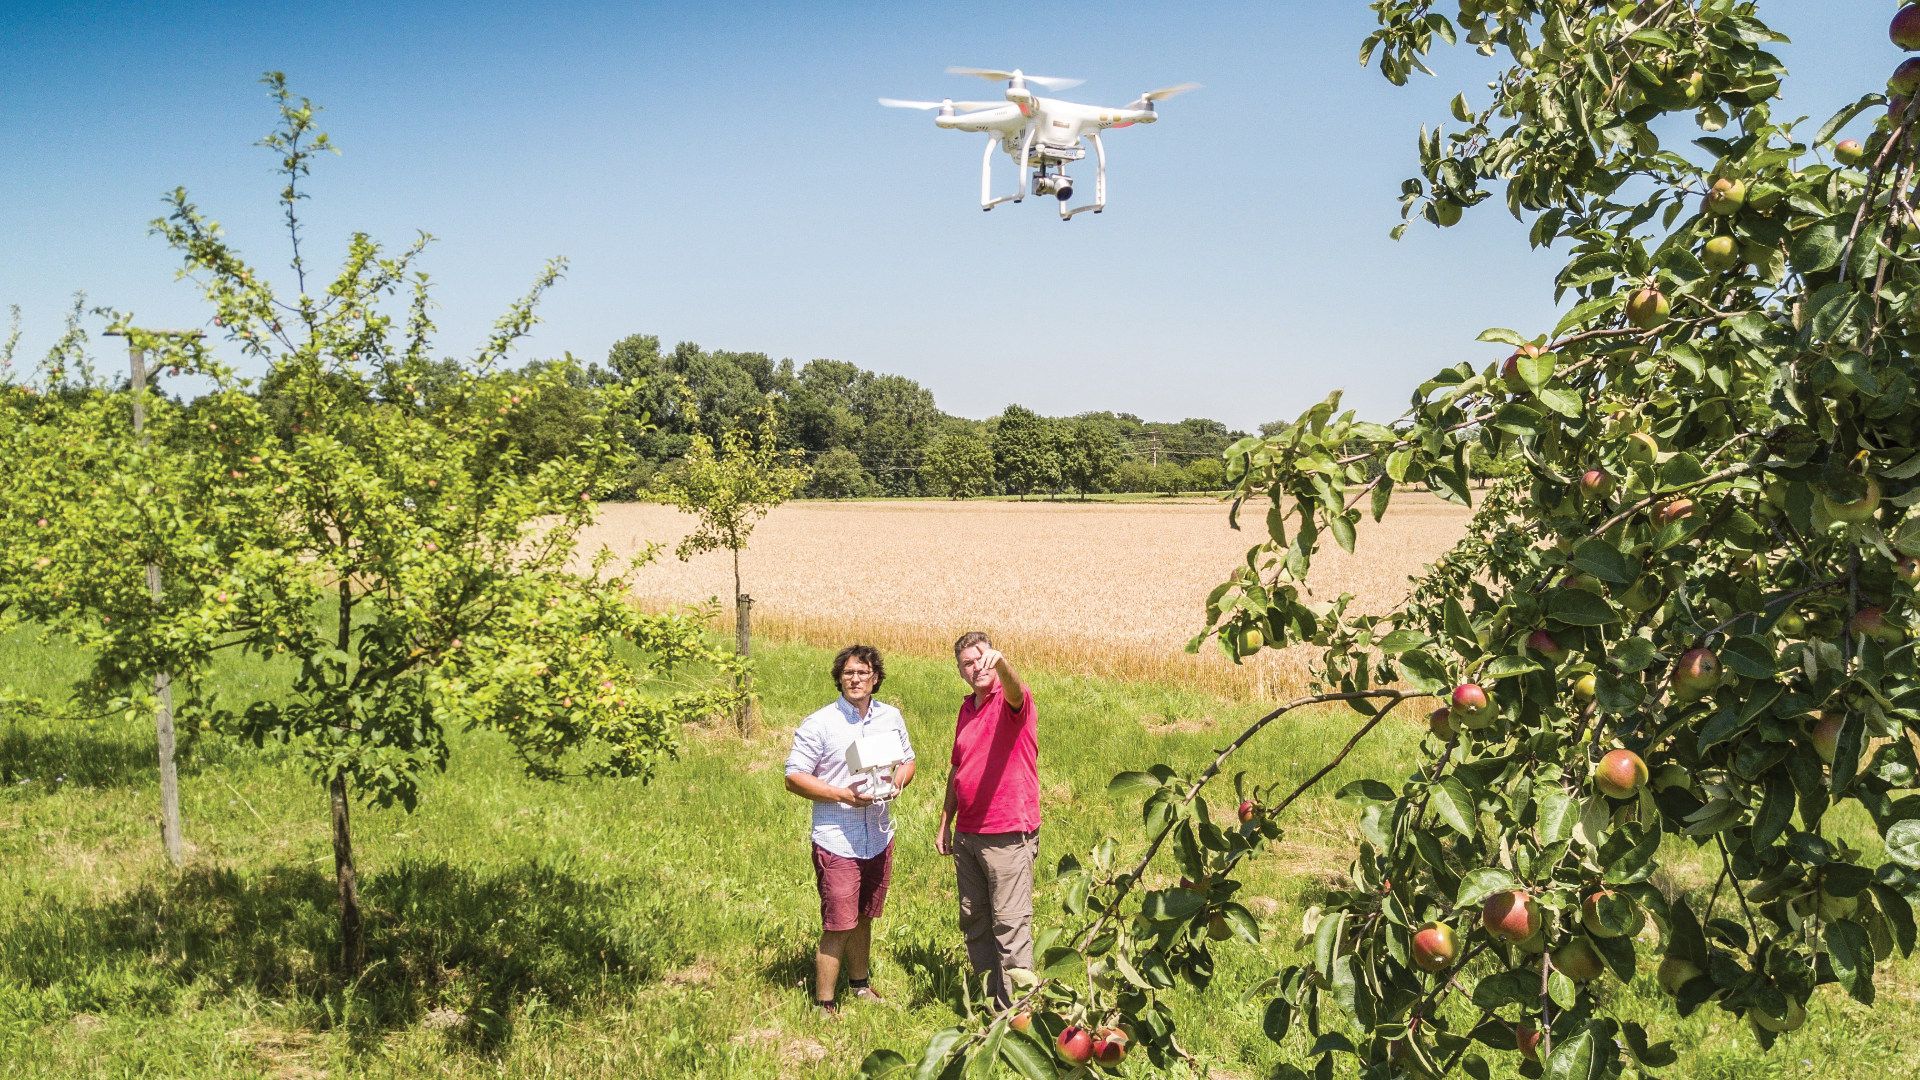 Measurement with drone – Audi Environmental Foundation